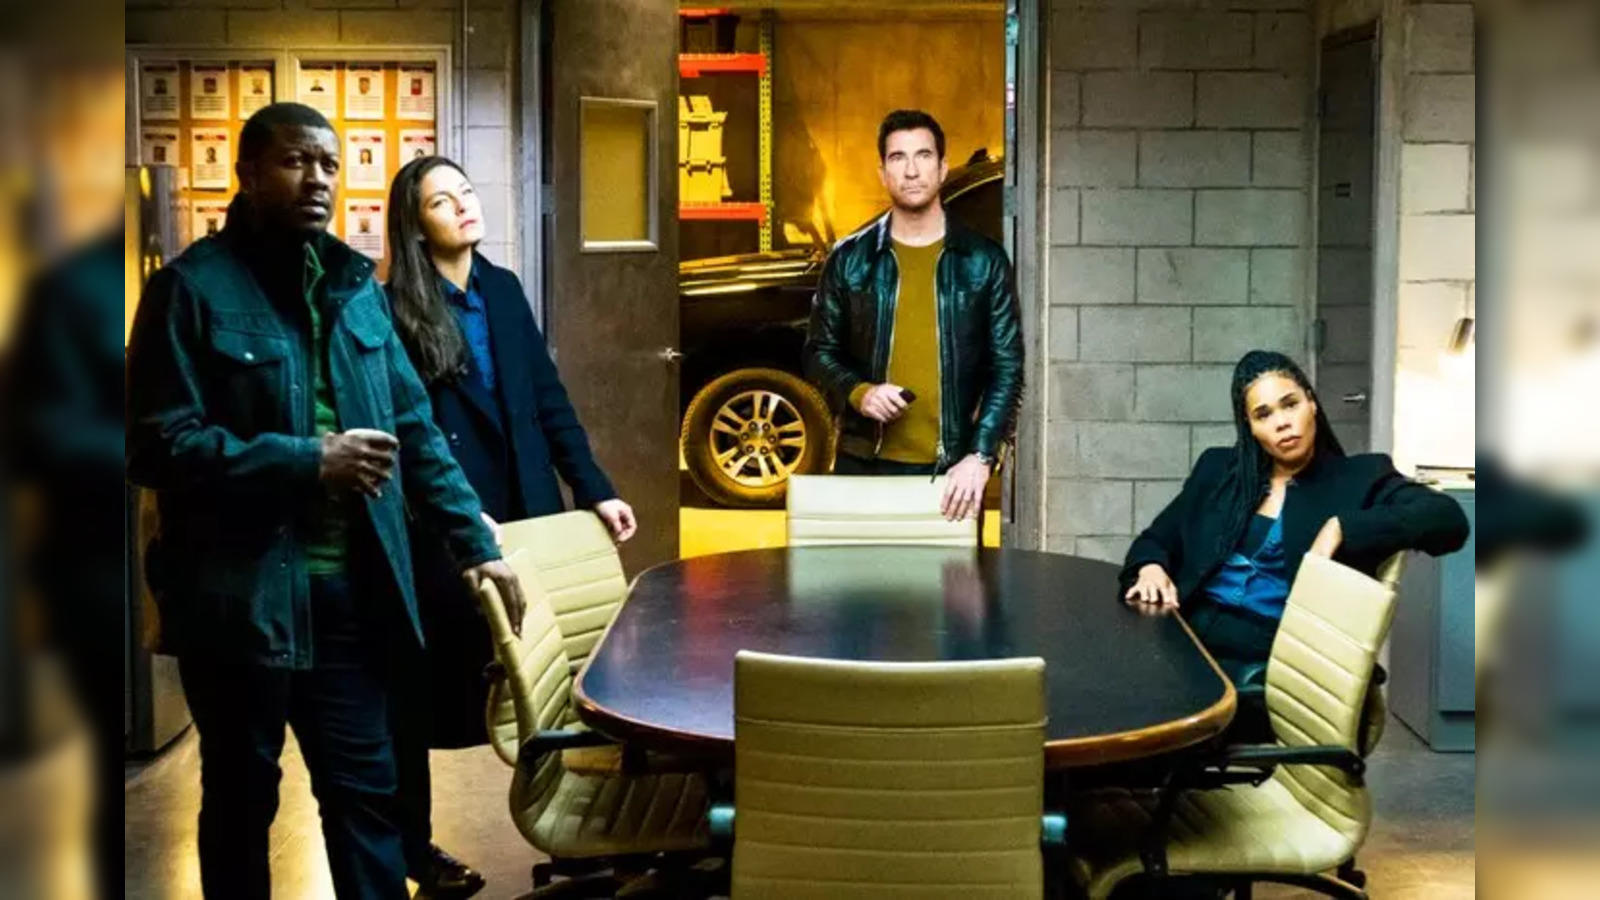 FBI season 6, Release date speculation and latest news